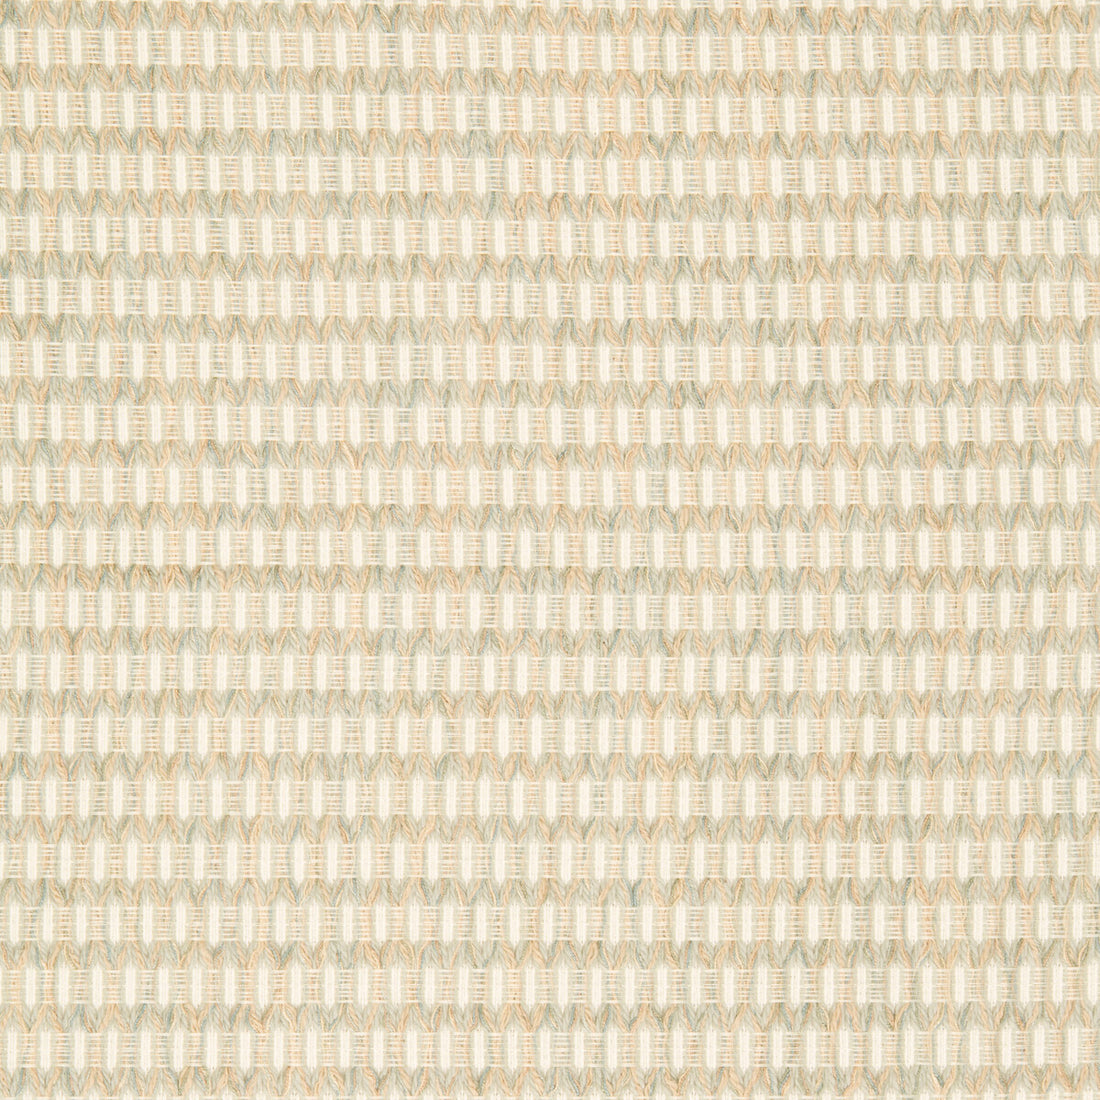 Kravet Design fabric in 34698-23 color - pattern 34698.23.0 - by Kravet Design in the Crypton Home collection